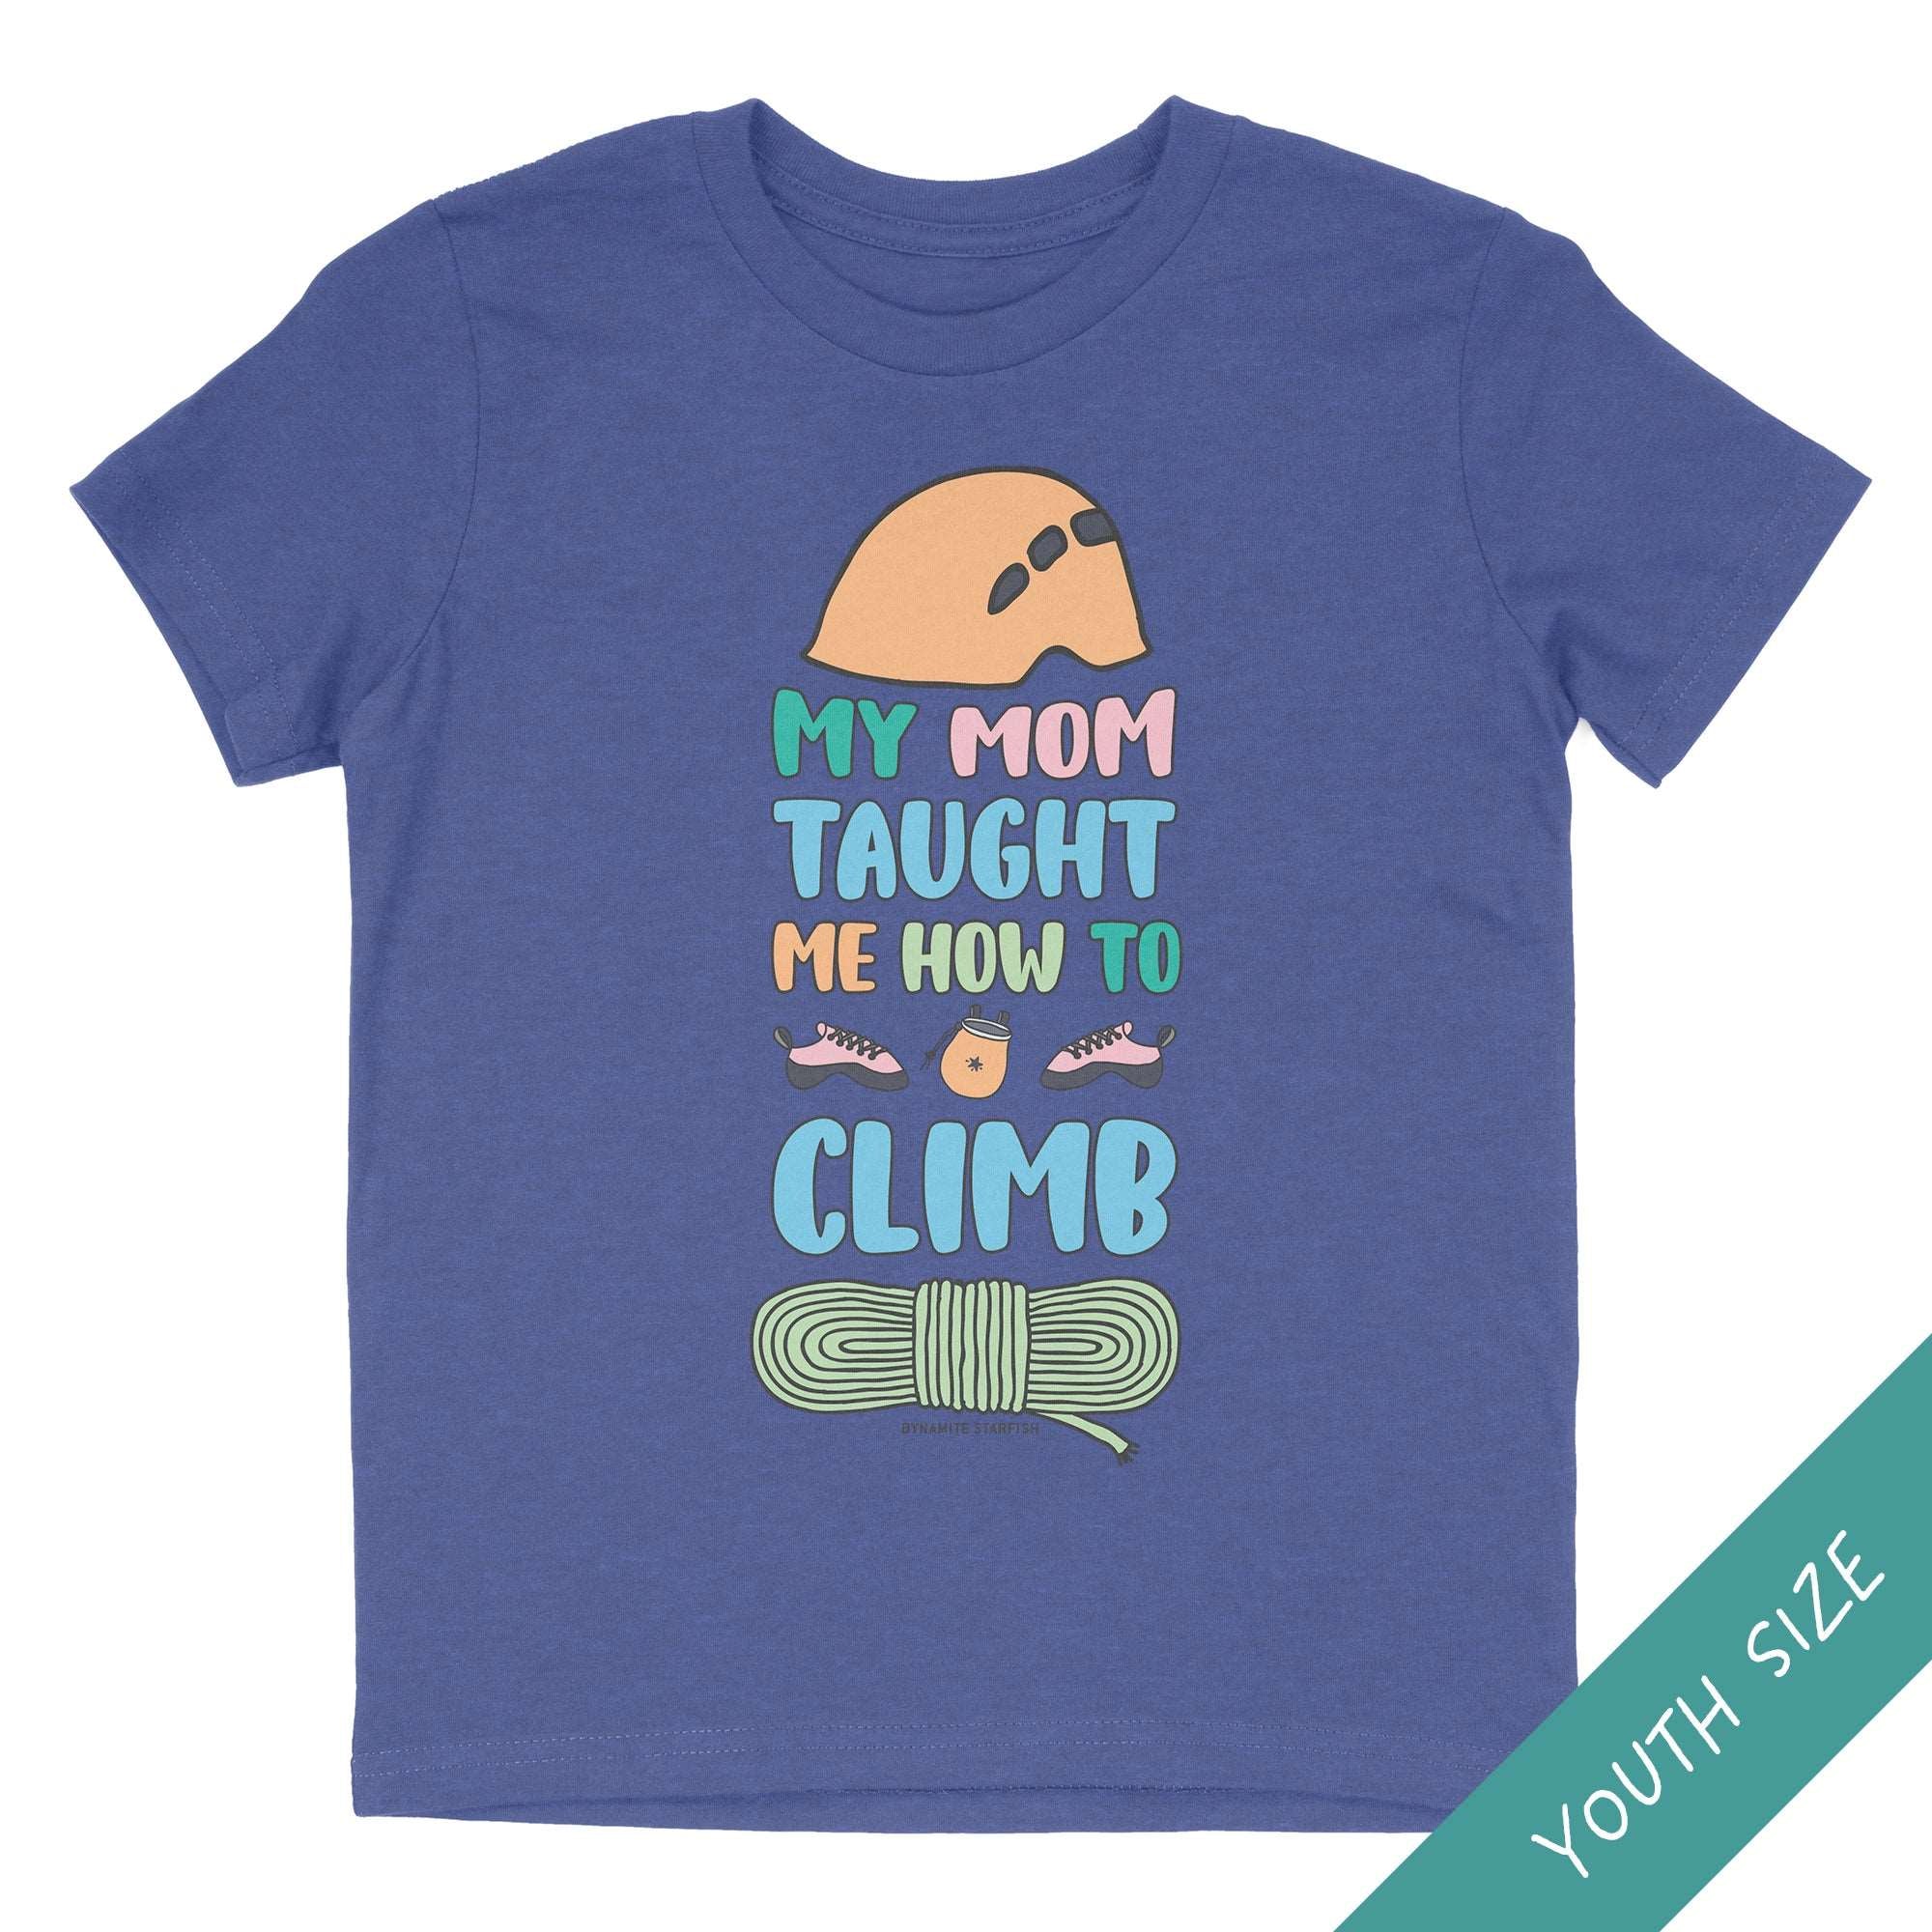 My Mom Taught Me How to Climb — Youth Rock Climbing T-Shirt